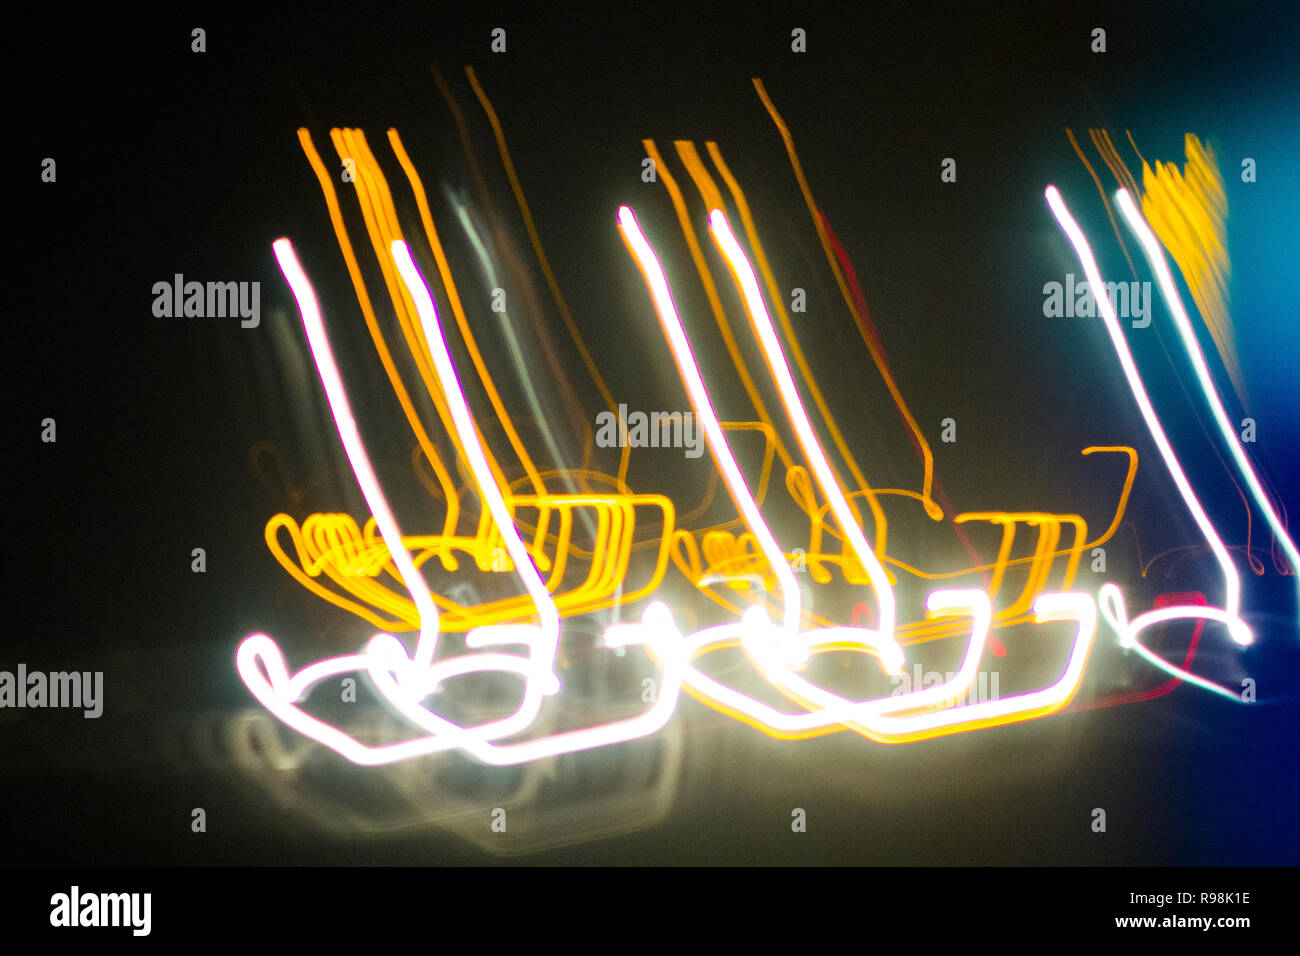 This long exposure creates some nice illuminated lines and shapes Stock Photo